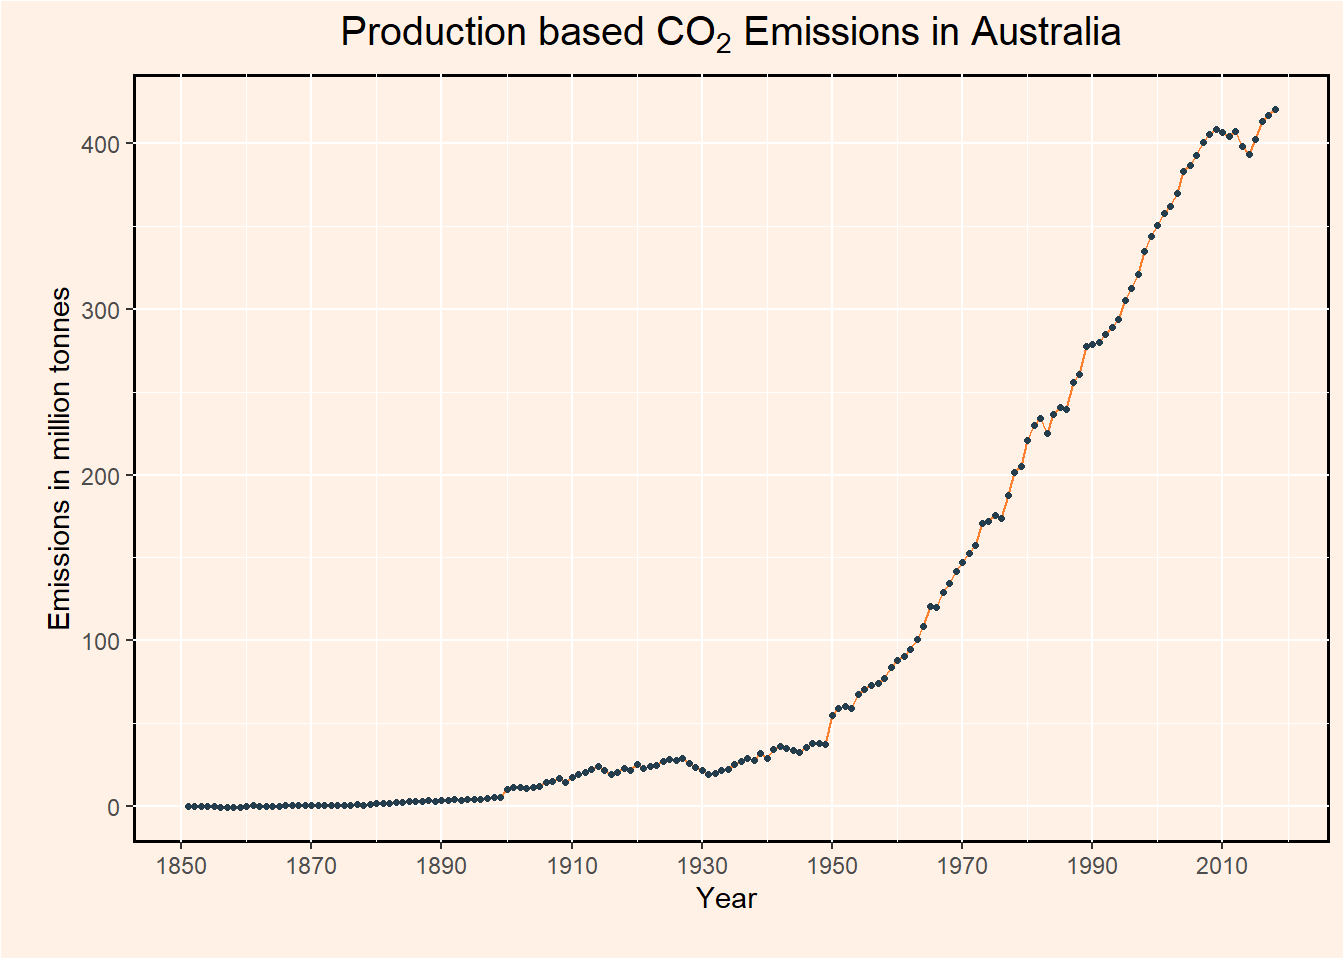 The figure depicts the carbon dioxide emissions in Australia over the years.The level of emissions has been accelerating since the 1900s.